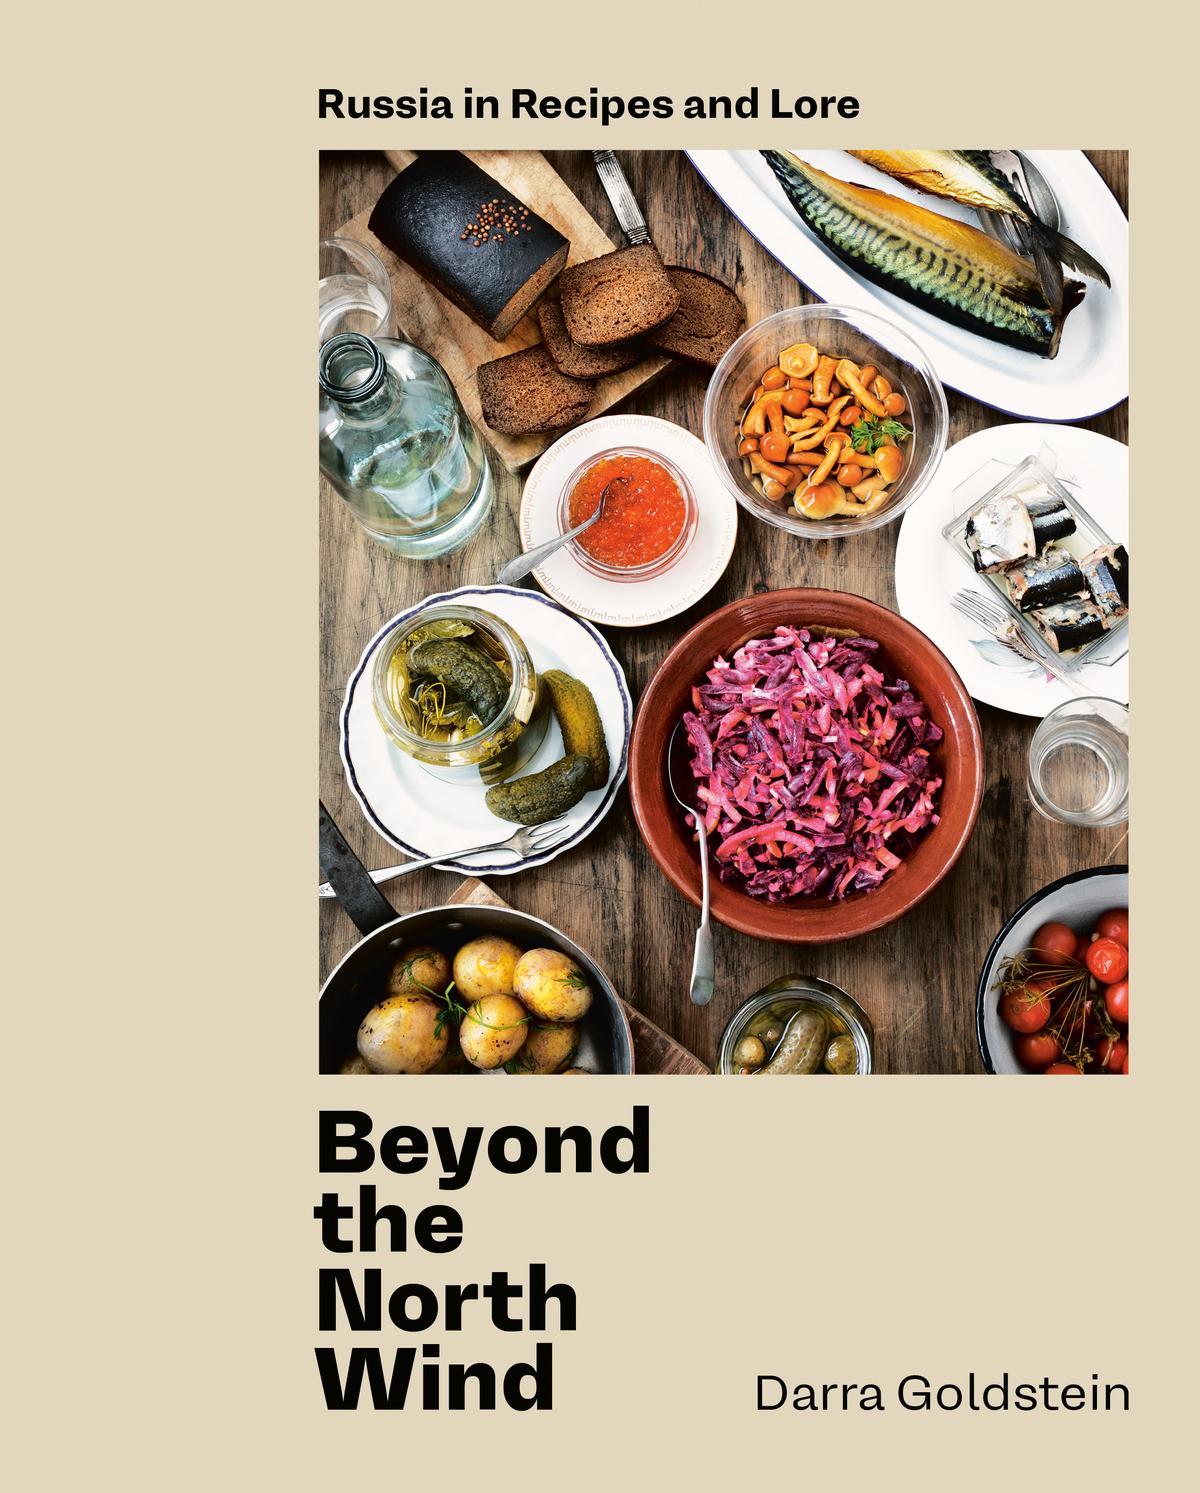 "Beyond the North Wind: Russia in Recipes and Lore" by Darra Goldstein (Ten Speed Press, $37.50).